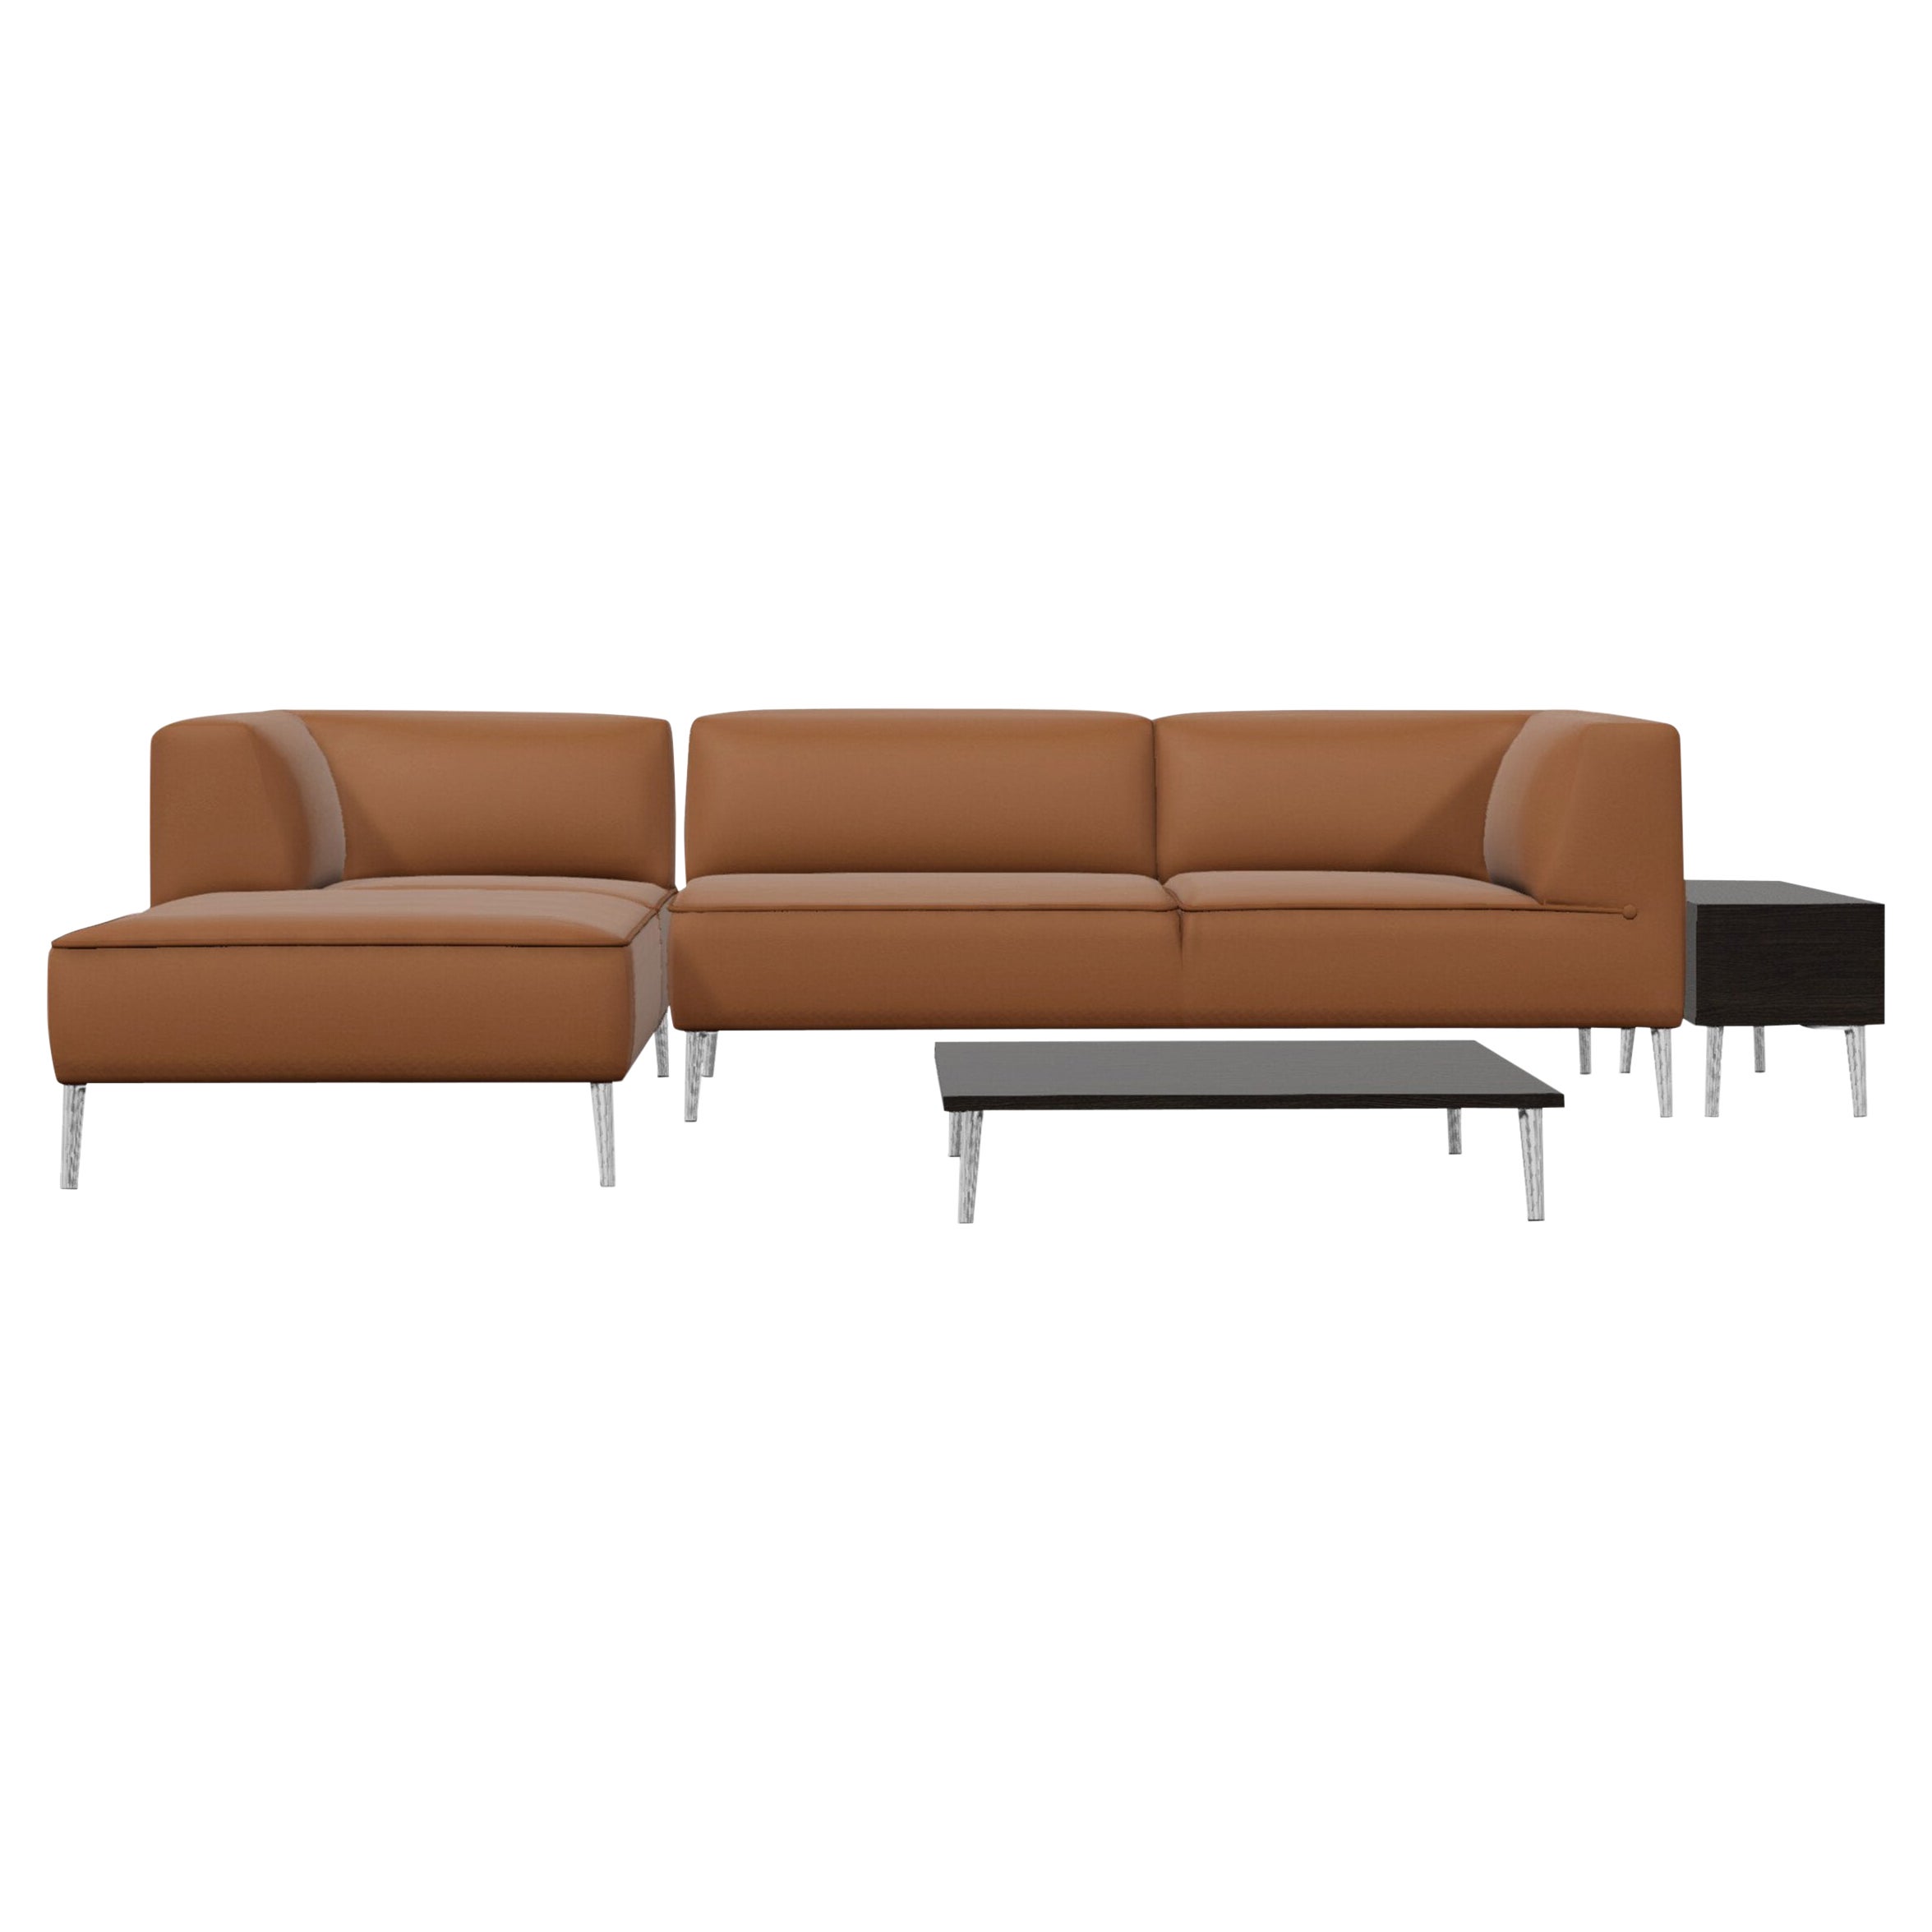 Moooi Sofa So Good Chaise Longue Left with Elements in Shade Ochre Upholstery